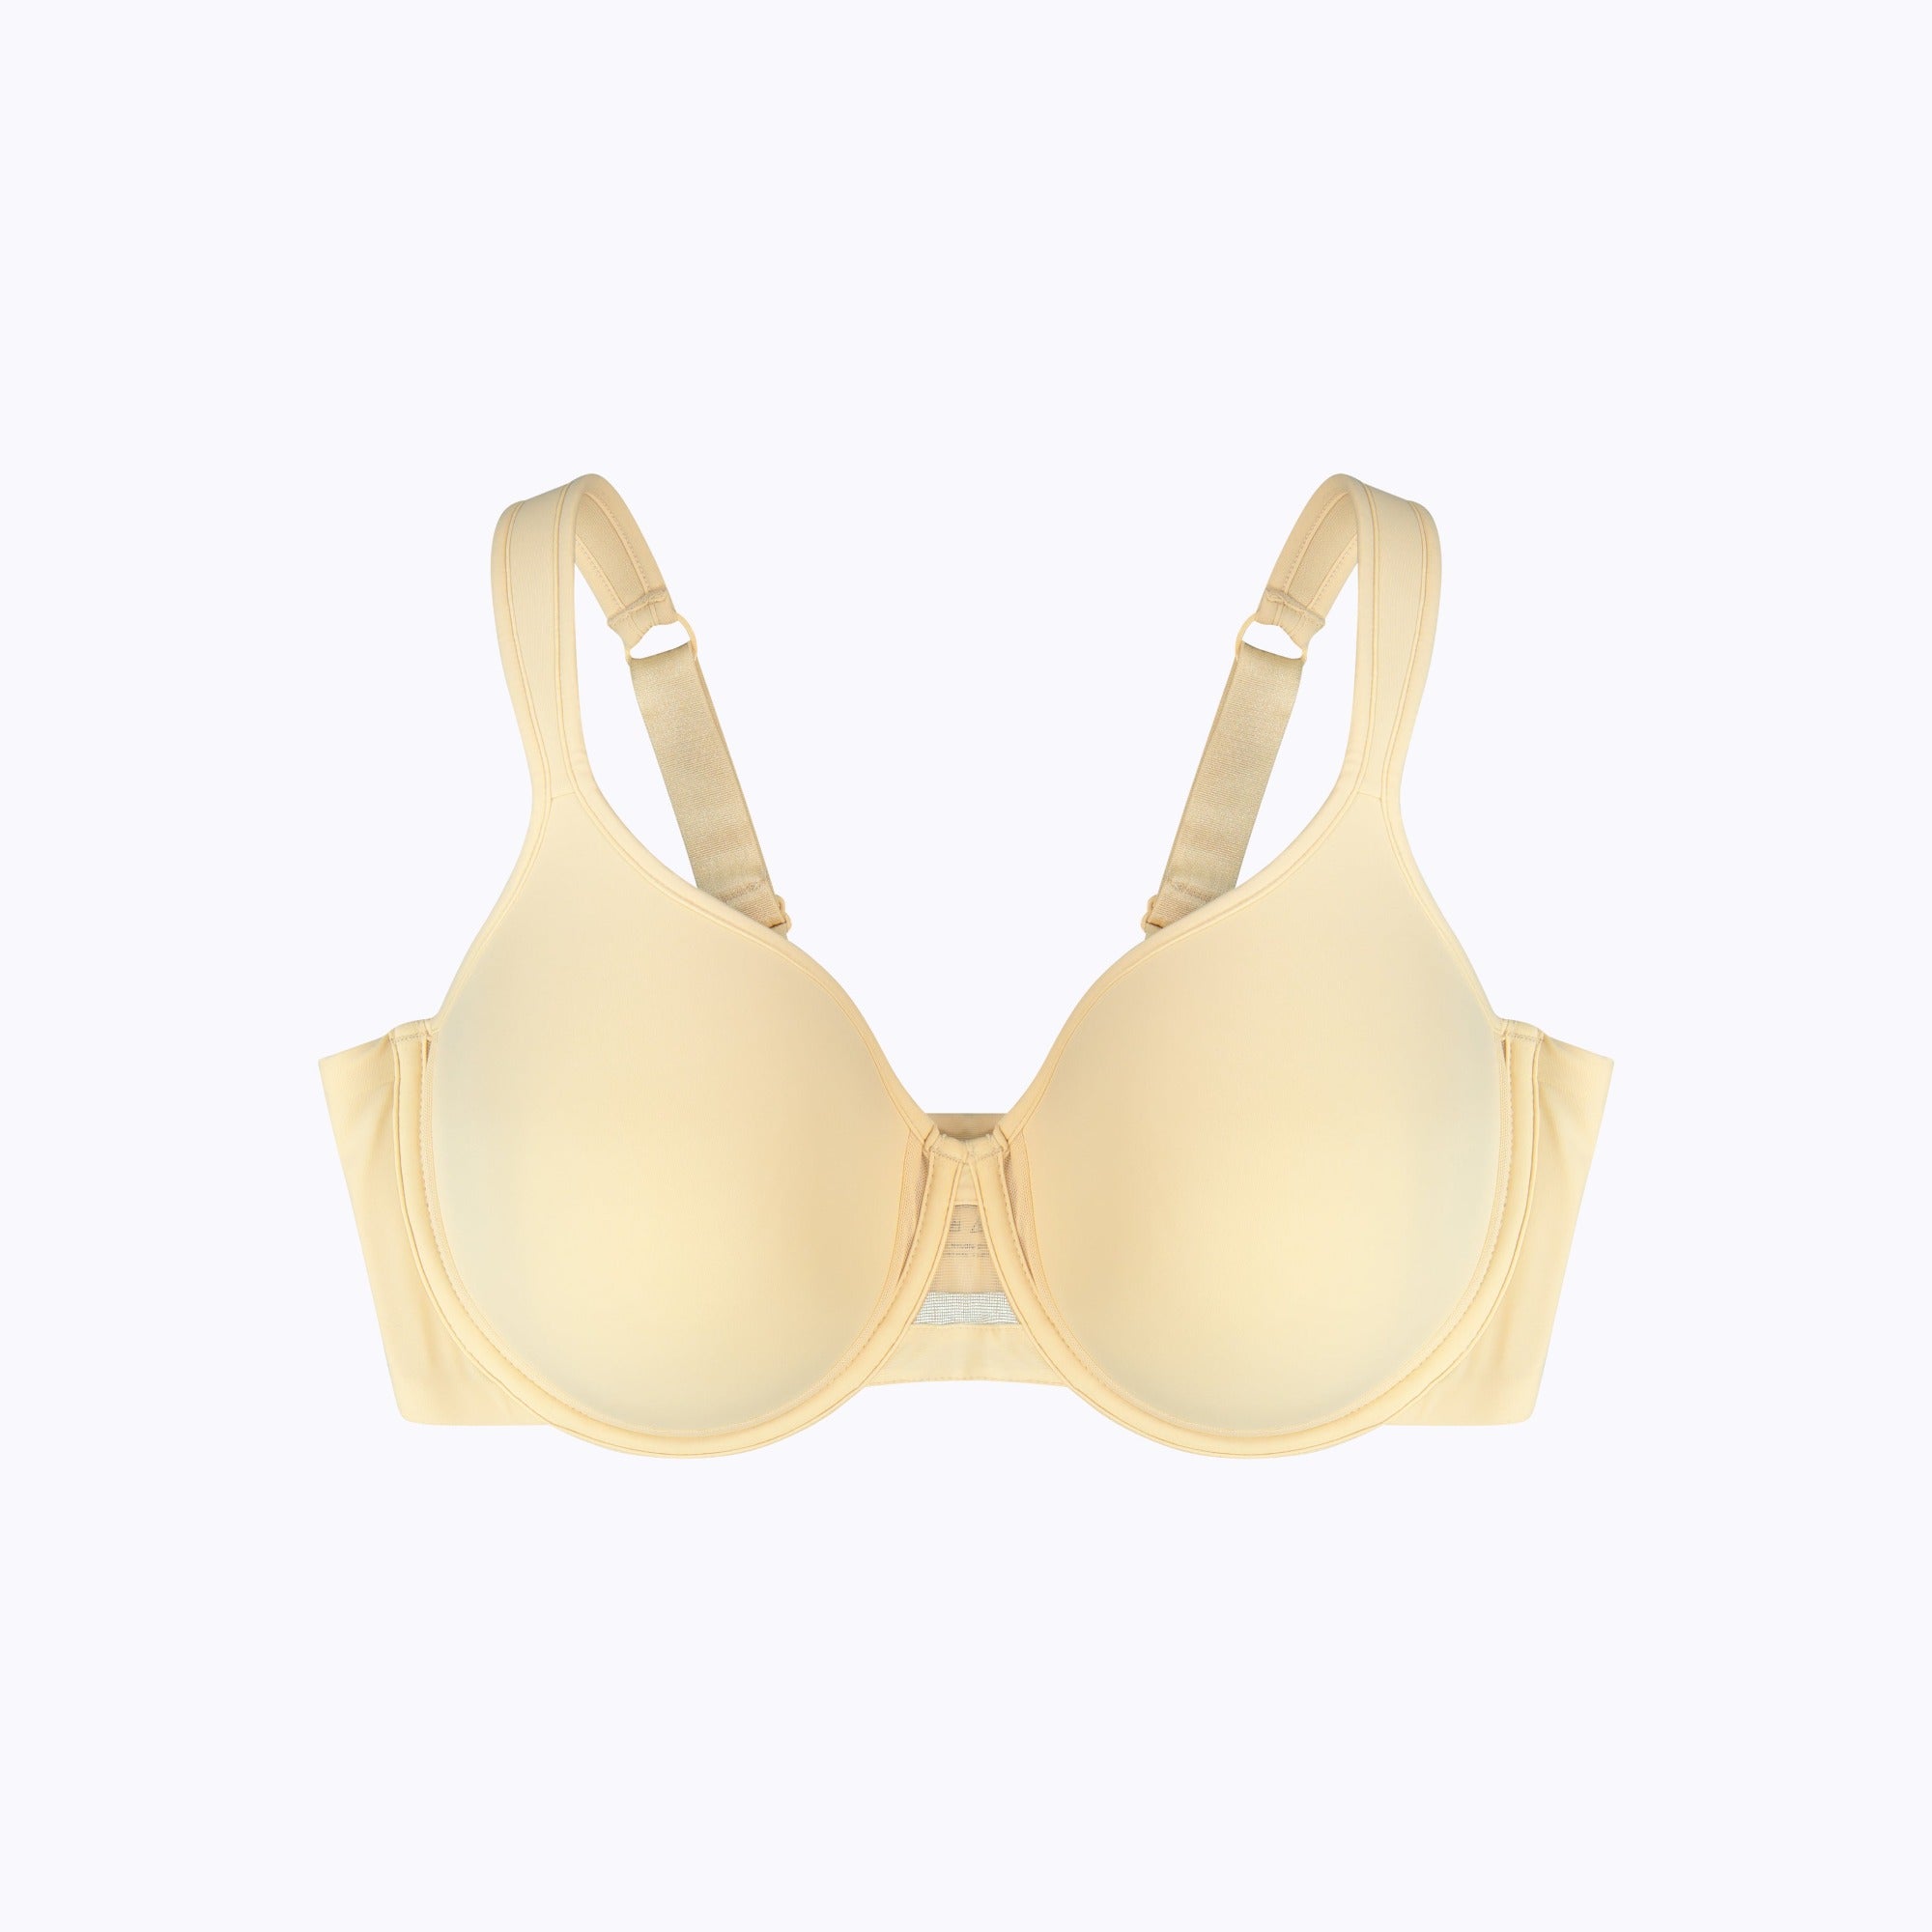 The Ultimate Coverage Bra with Underwire